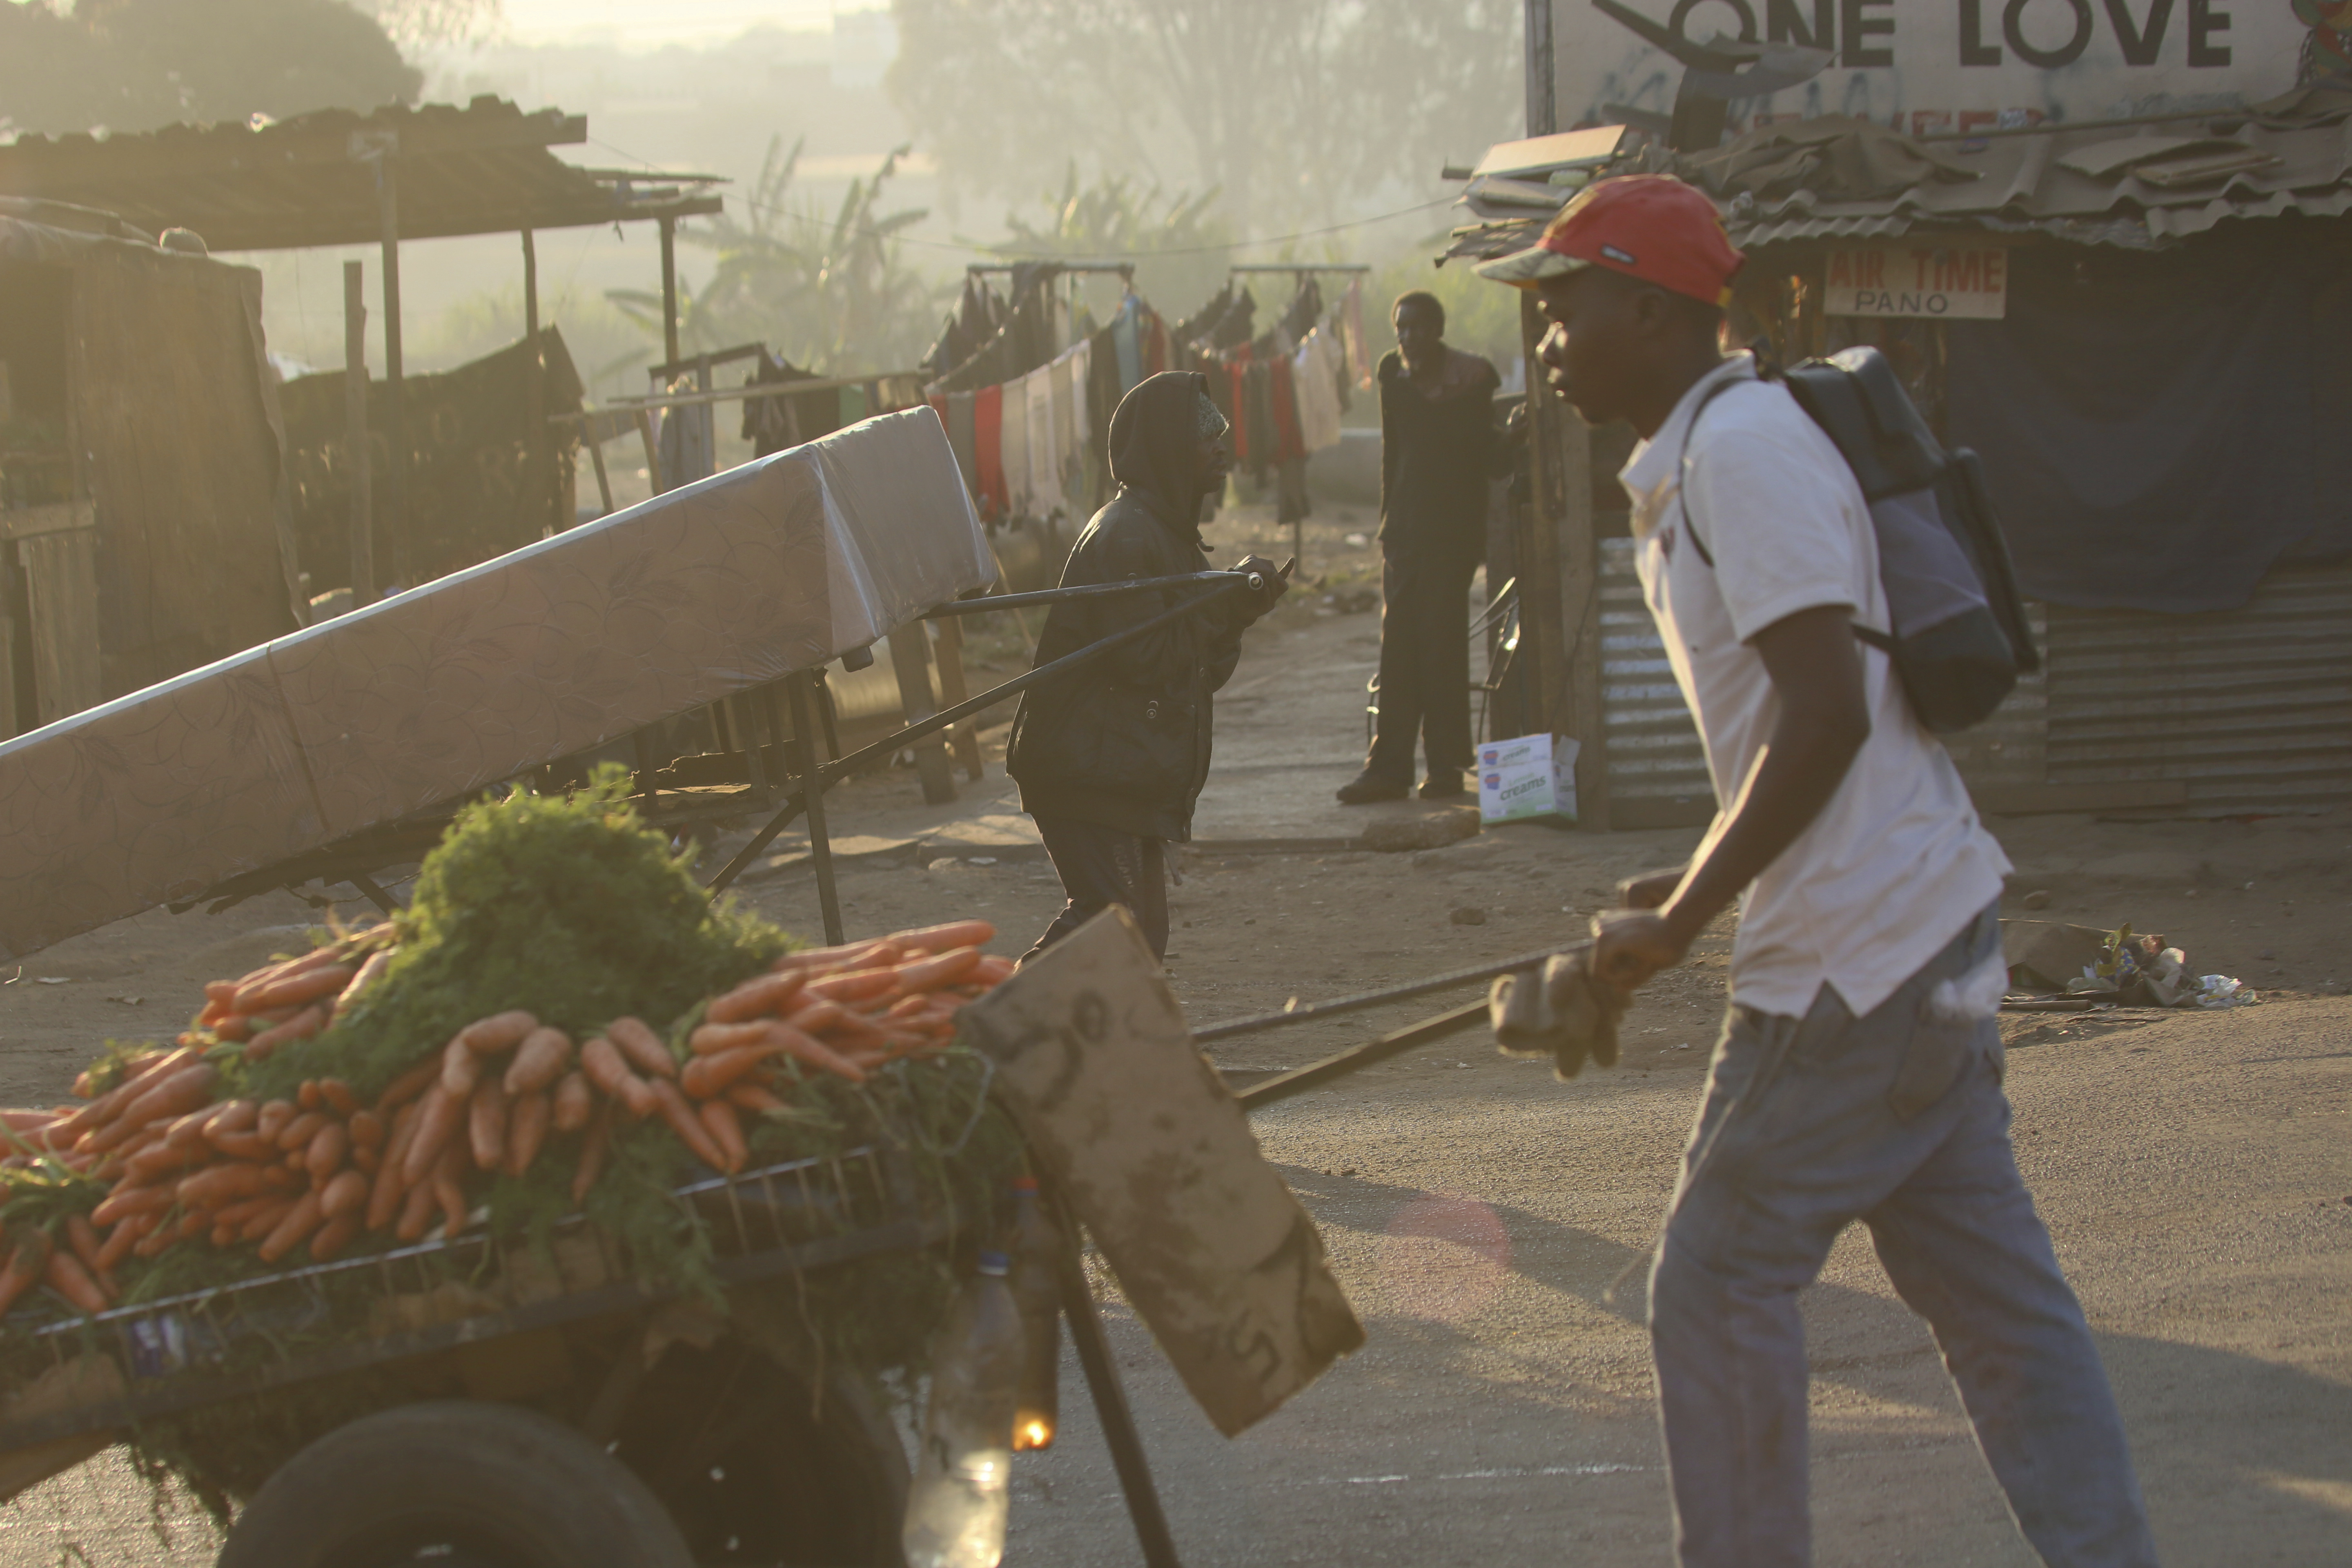 A man pushes a cart carrying carrots across paths at a market place in Harare, Zambia, August 14, 2019. /CFP